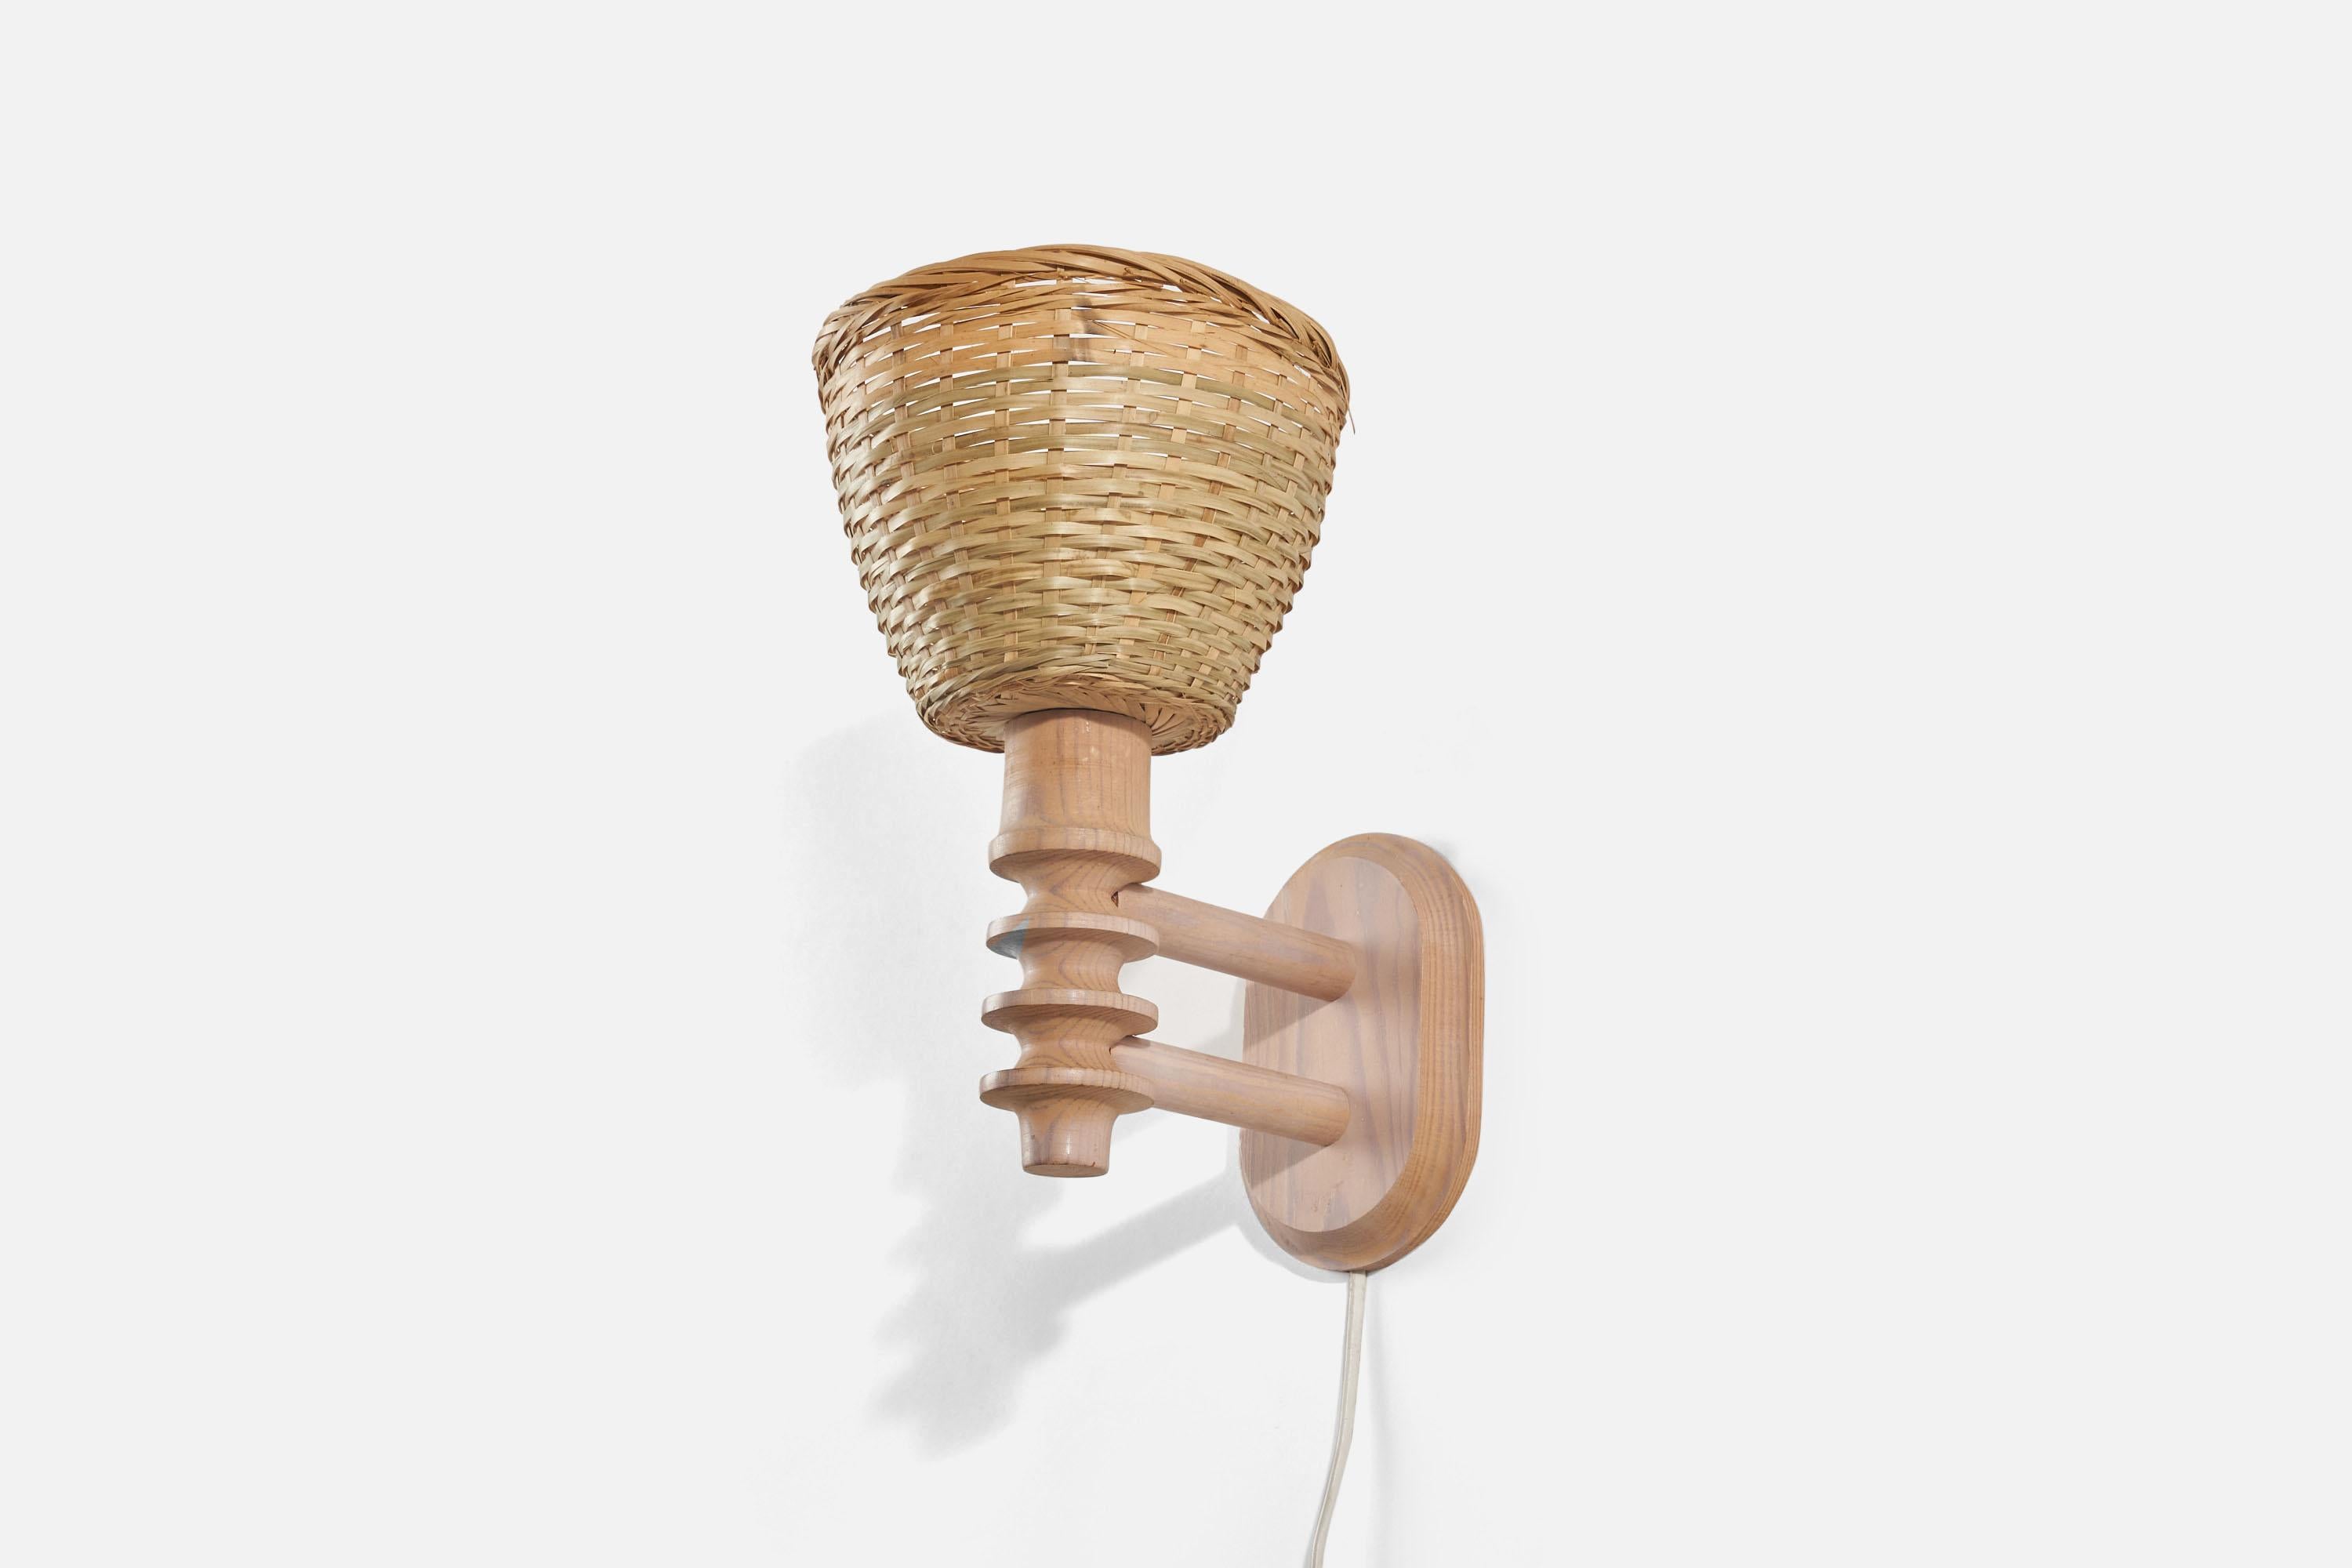 A pine and rattan sconce / wall light designed and produced in Sweden, 1960s.

Sold with lampshade(s). Dimensions stated are of Sconce with Shade(s).

Dimensions of back plate (inches) : 5.96 x 4 x 0.80 (Height x Width x Depth)

Socket takes